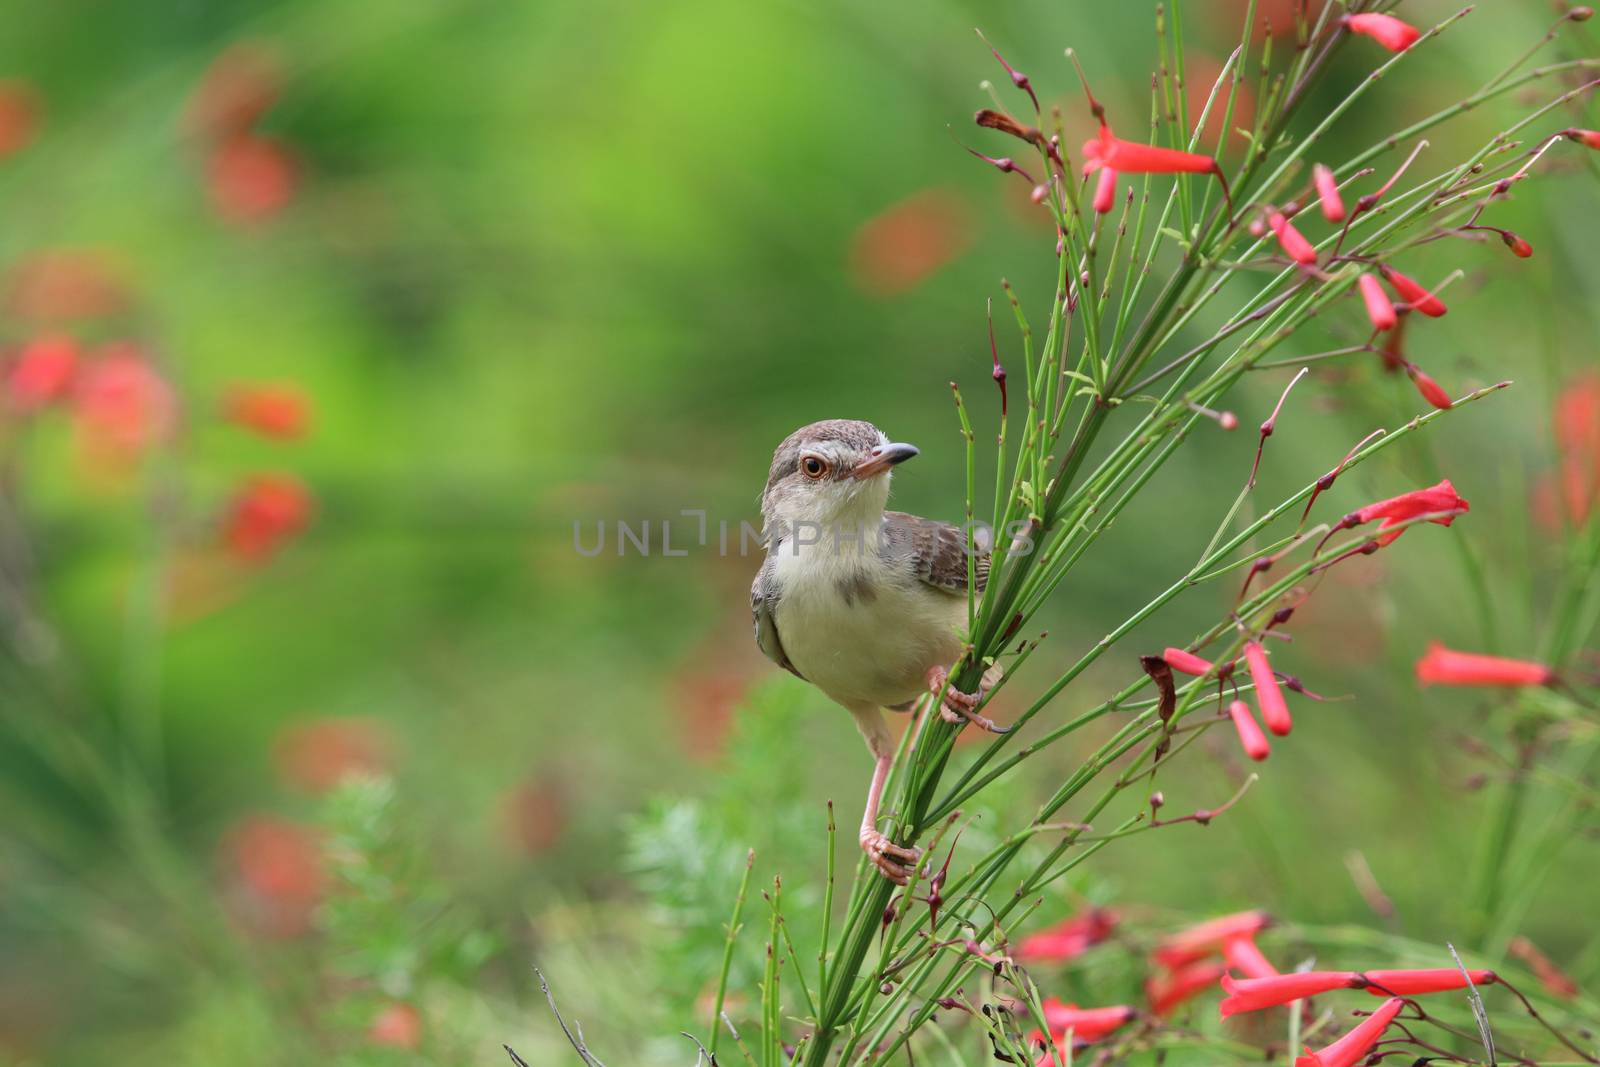 Rufous-faced Warbler cute bird and small size holding on Coral fire tree in nature background